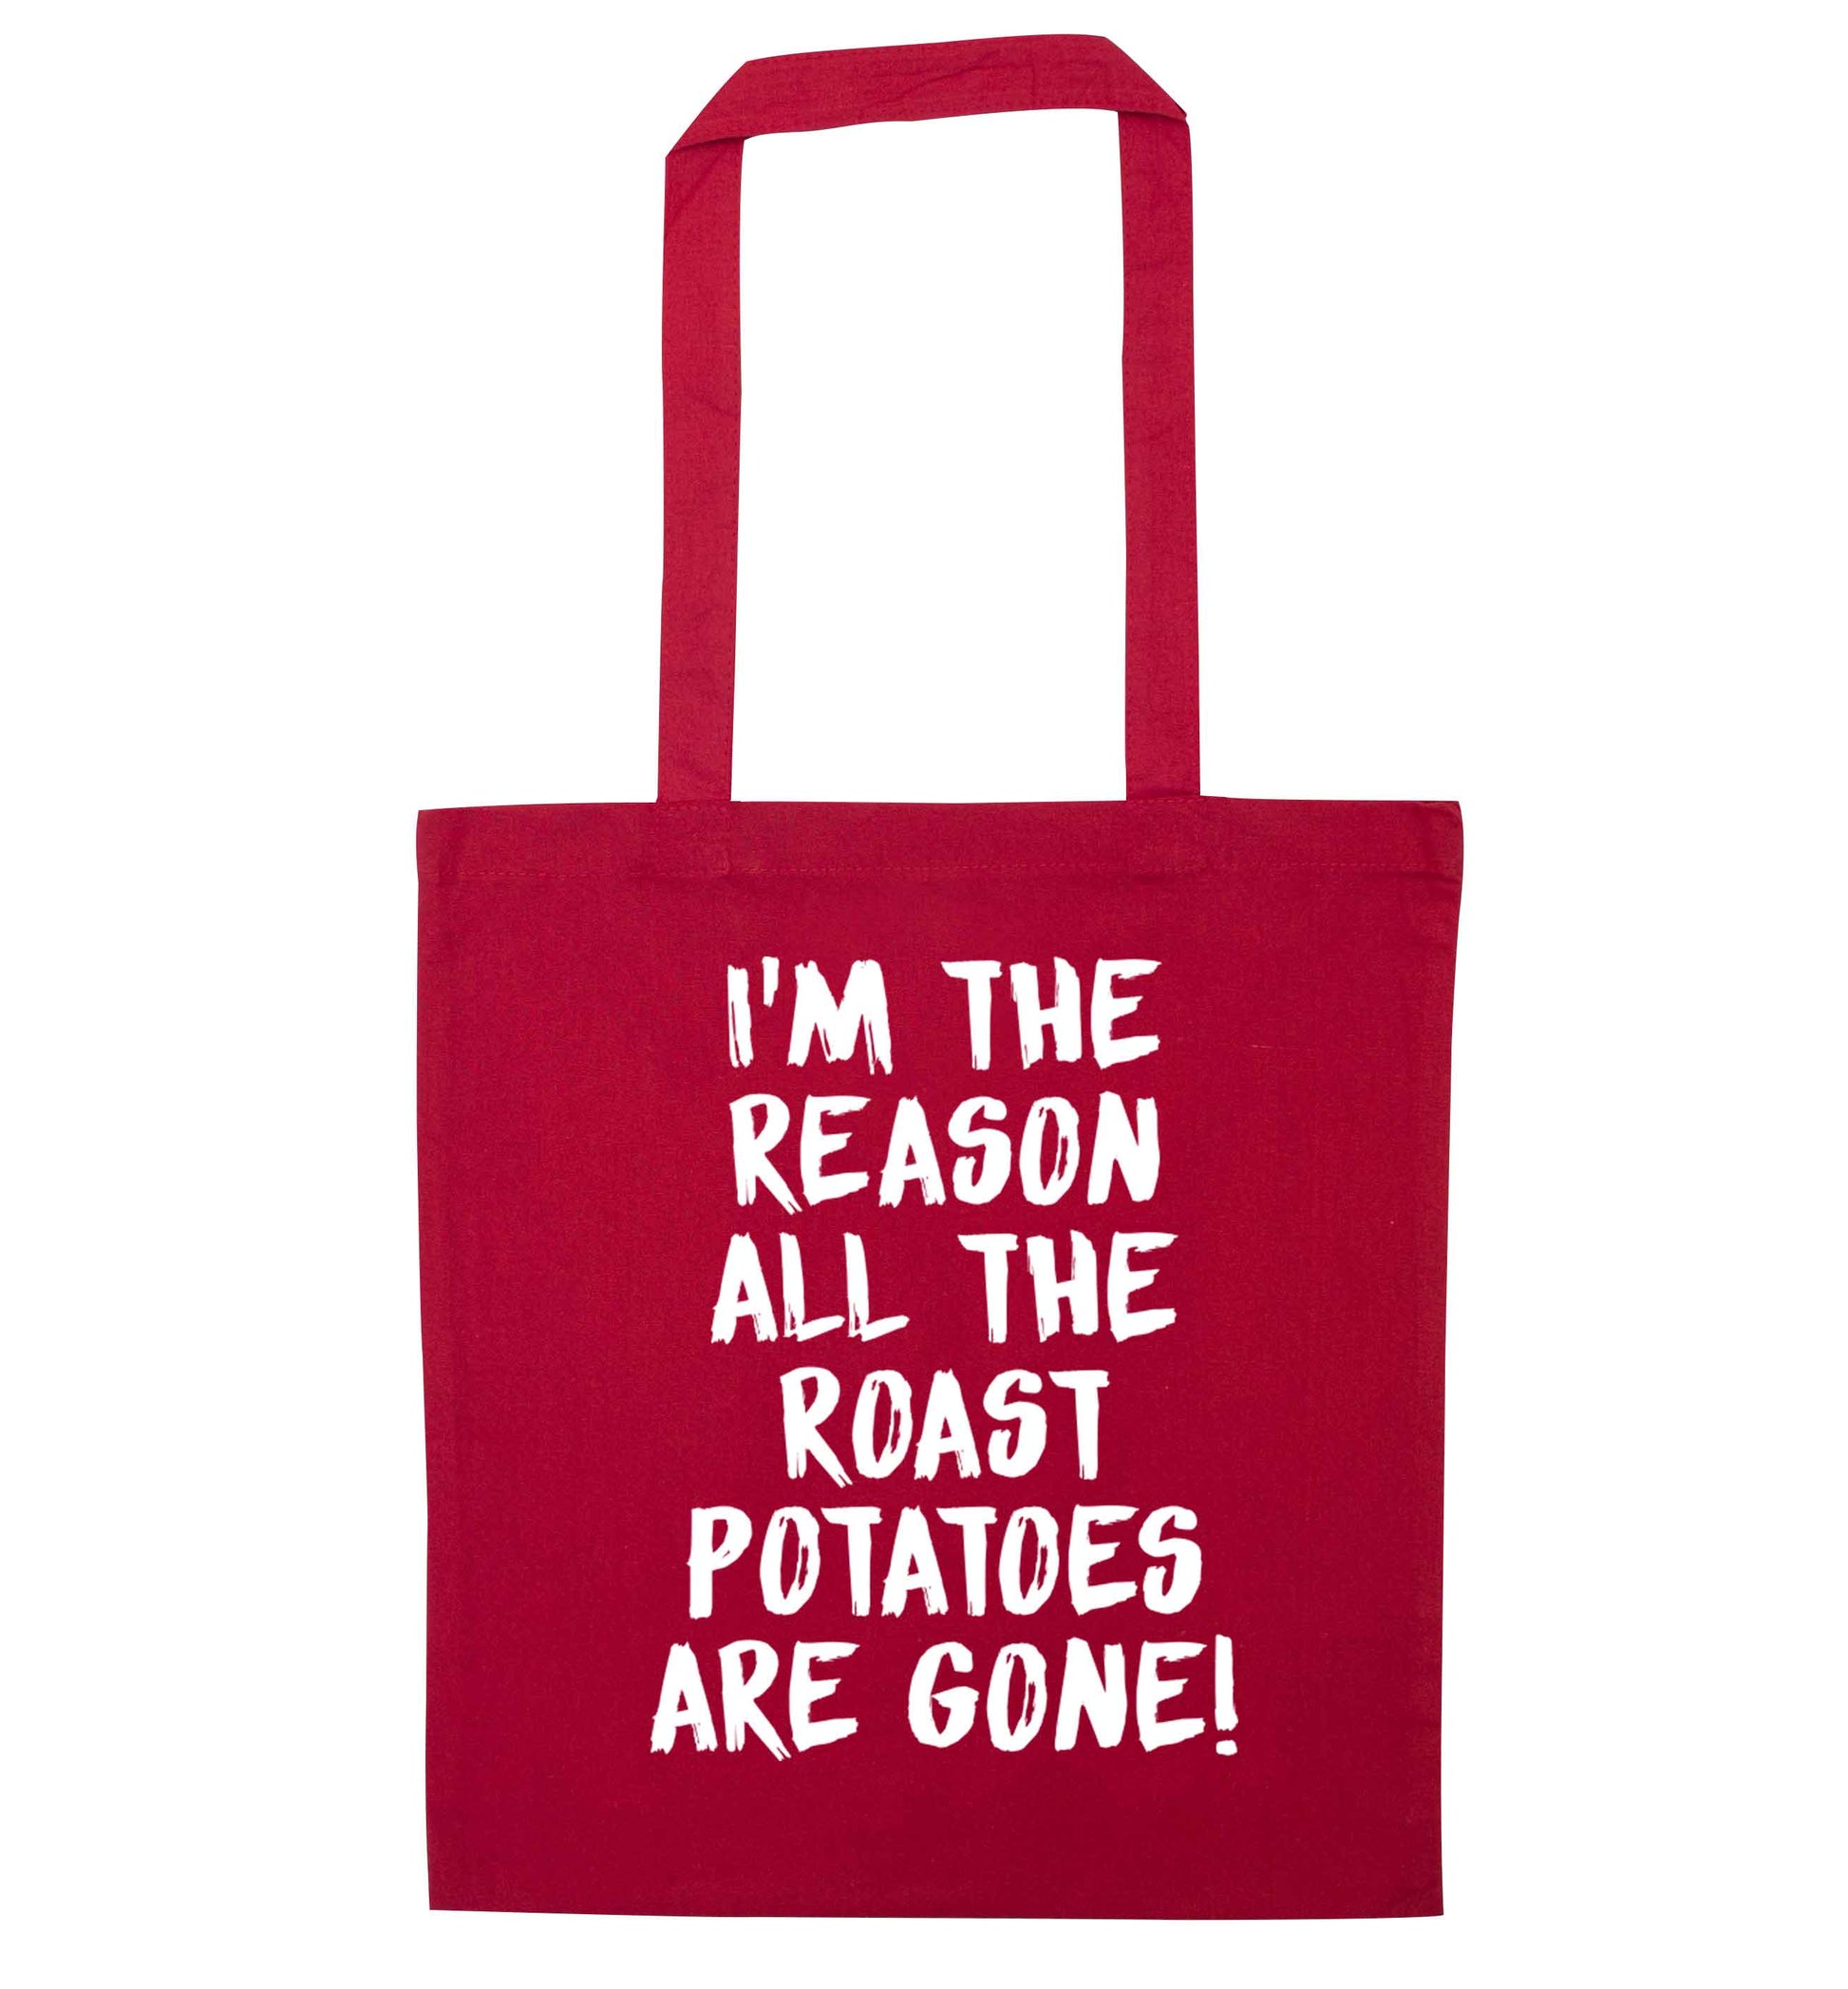 I'm the reason all the roast potatoes are gone red tote bag